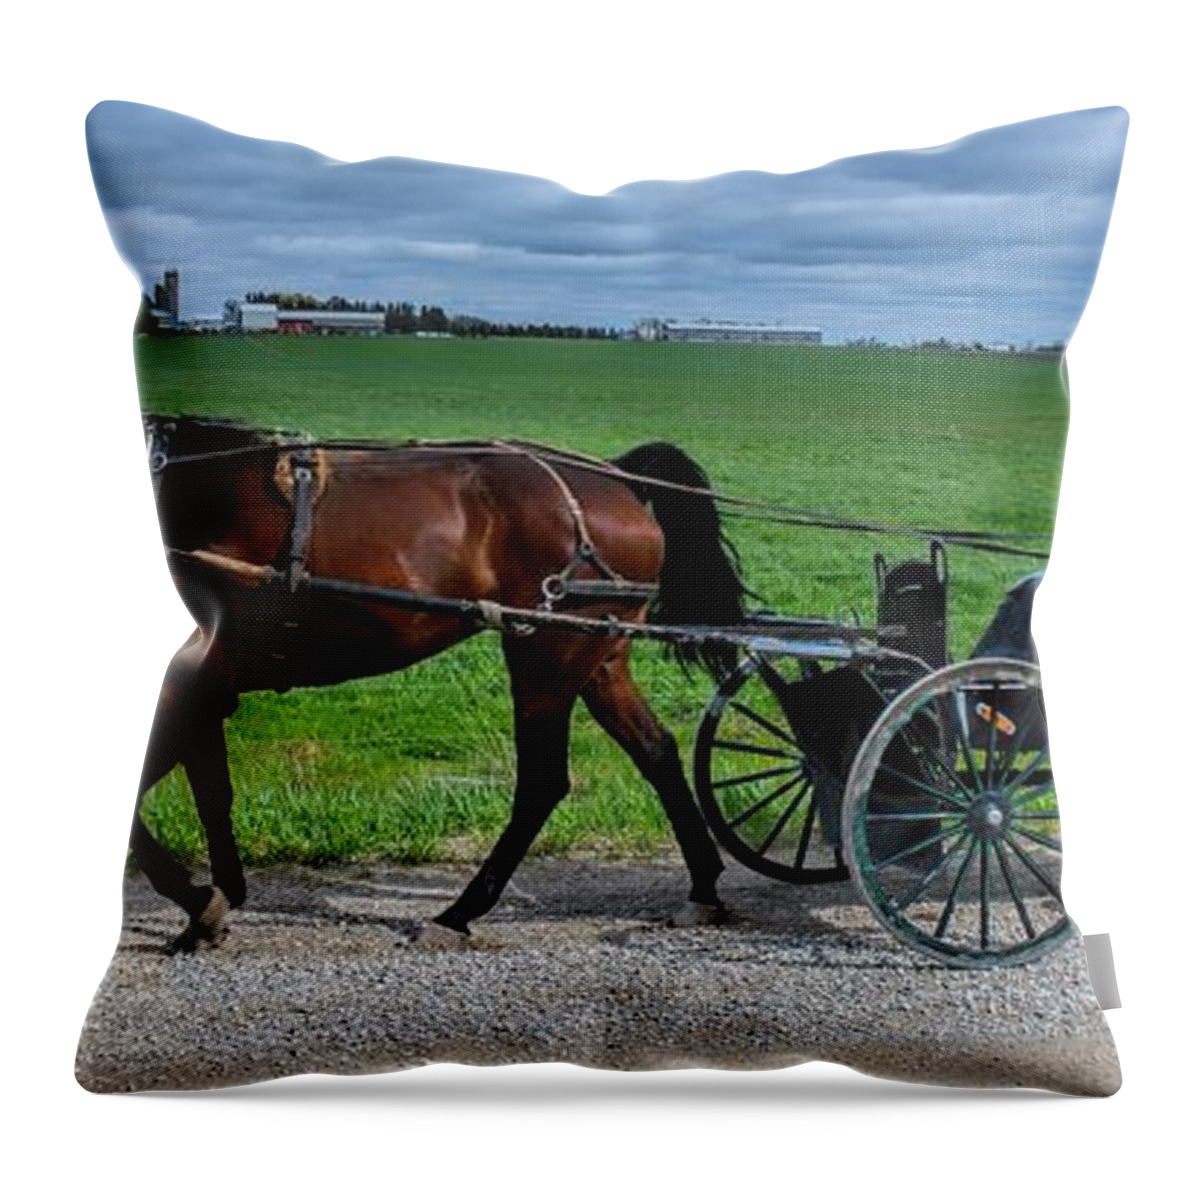 Horse Throw Pillow featuring the photograph Horse And Buggy on the Farm by Henry Kowalski